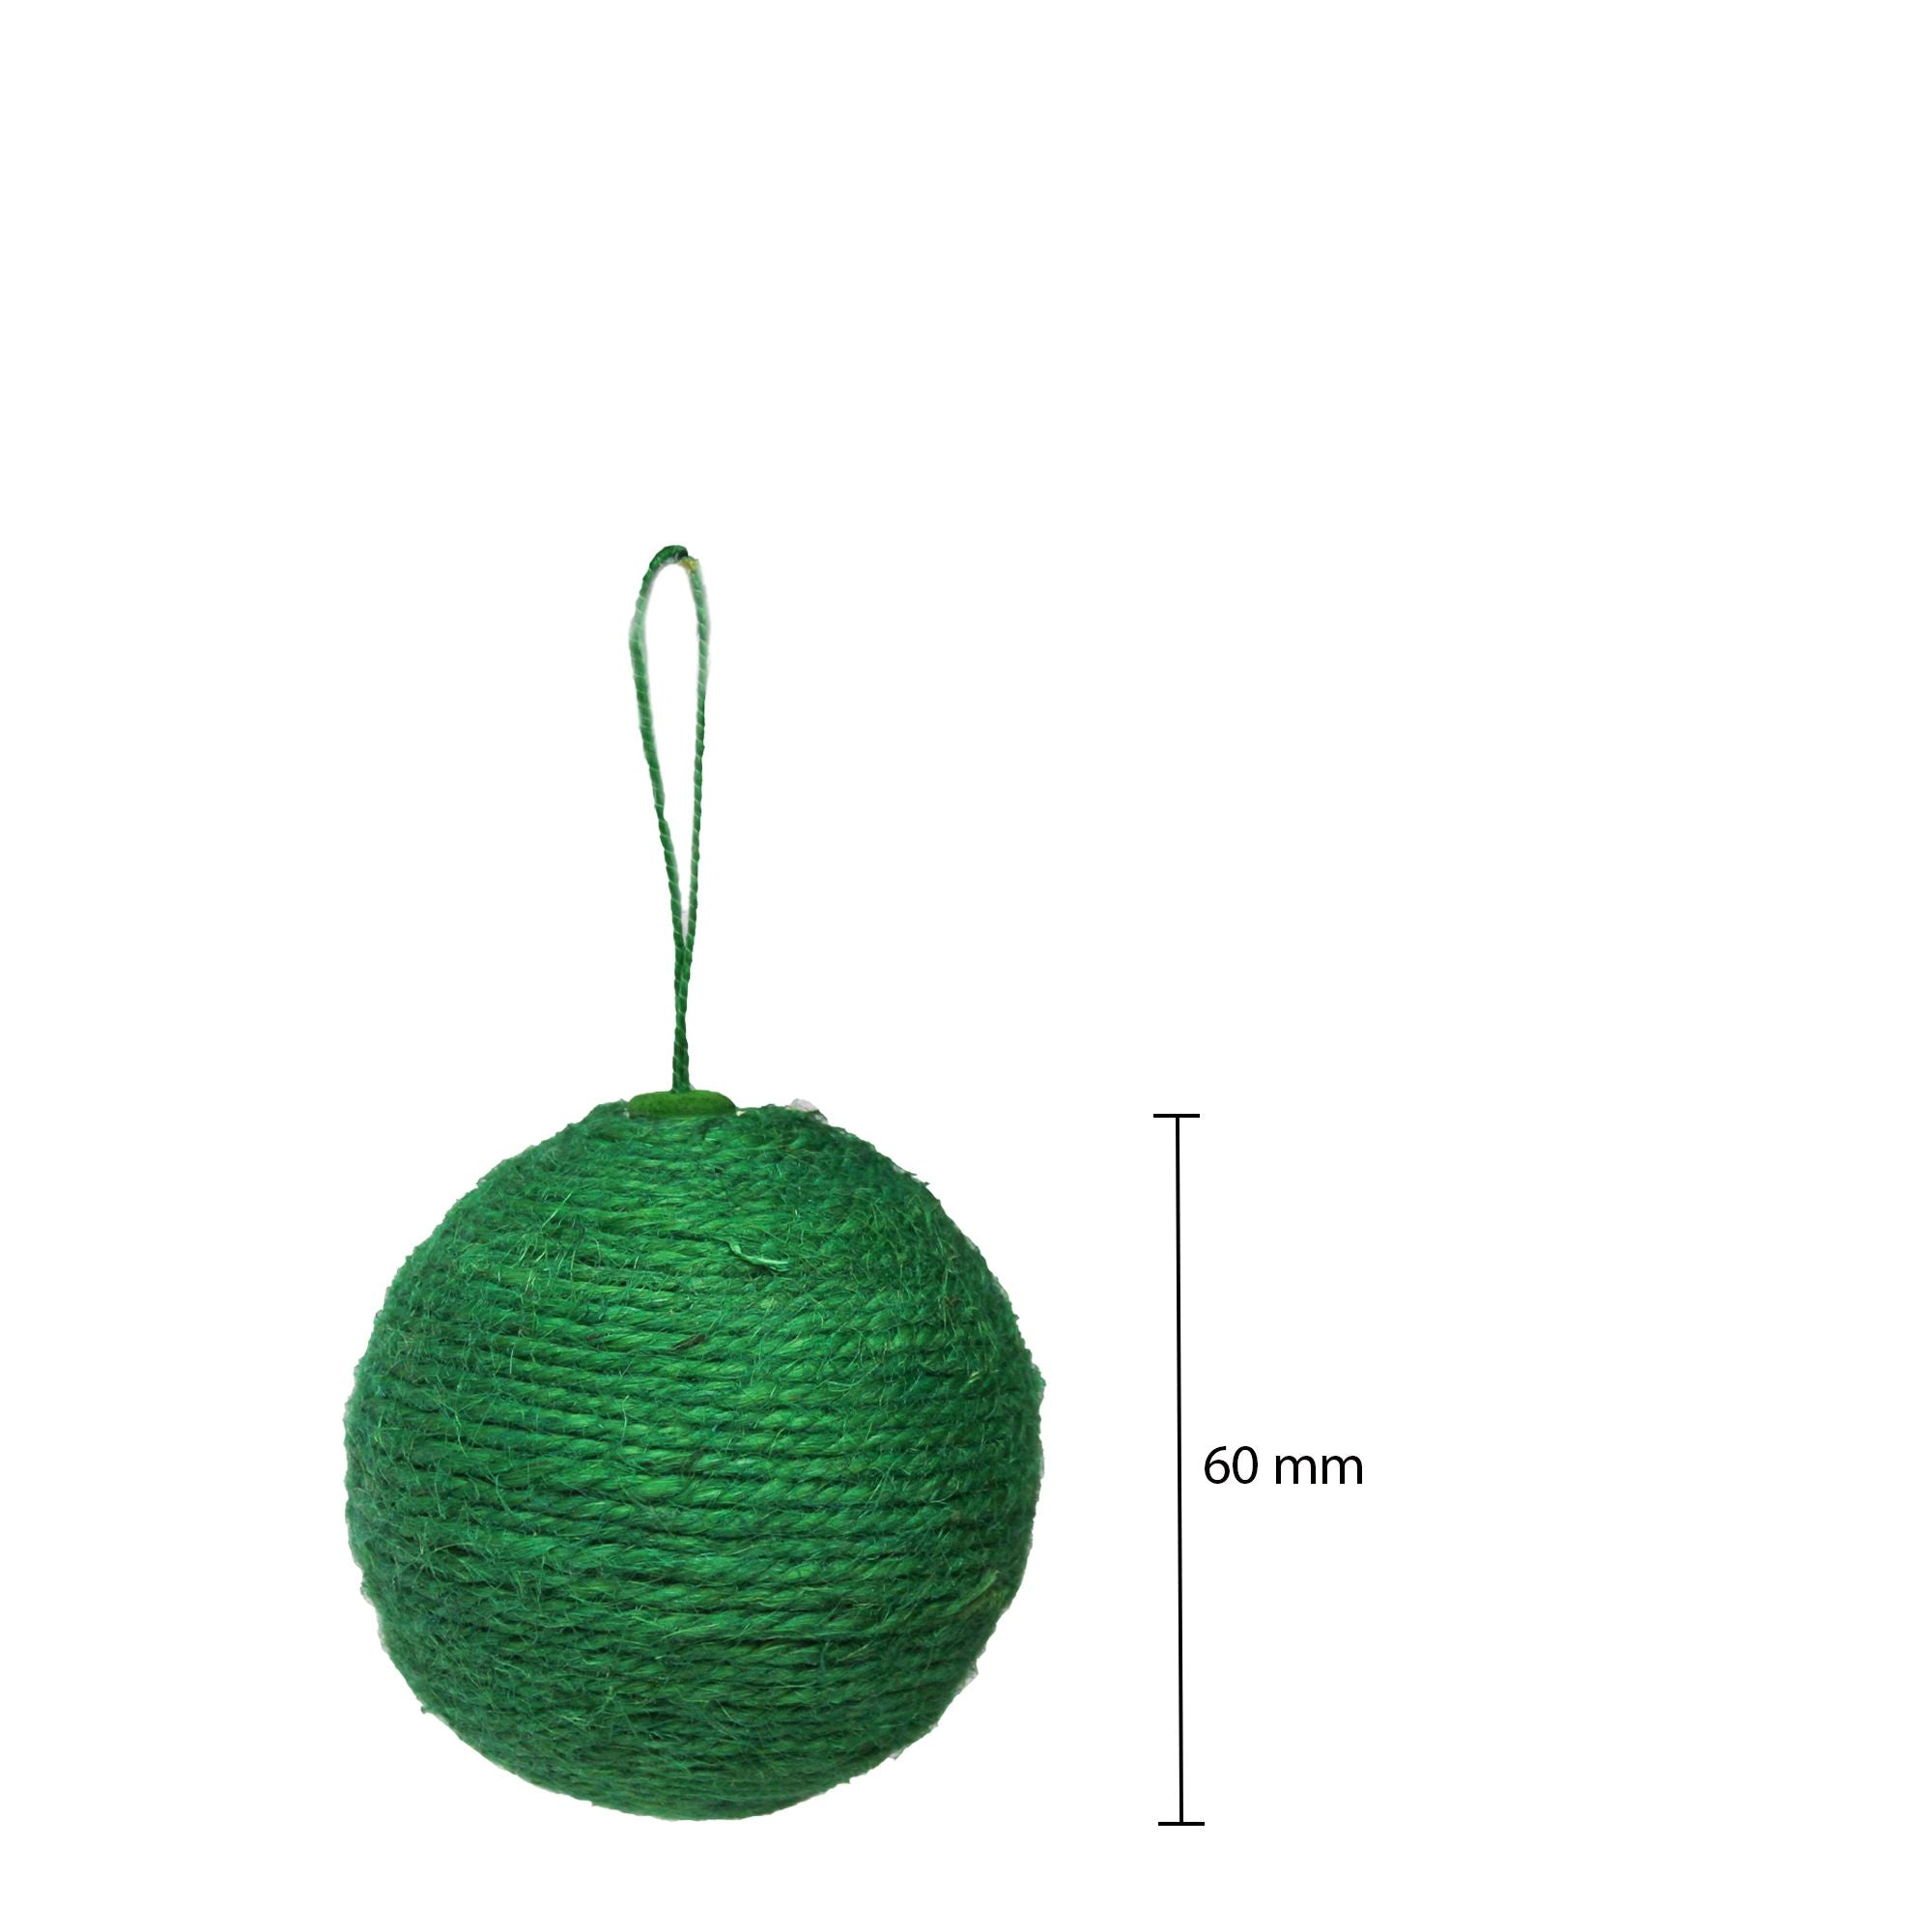 Handmade Christmas Ornaments - Jute Baubles, 60mm, Assorted Colours - Red, Green, 4pc